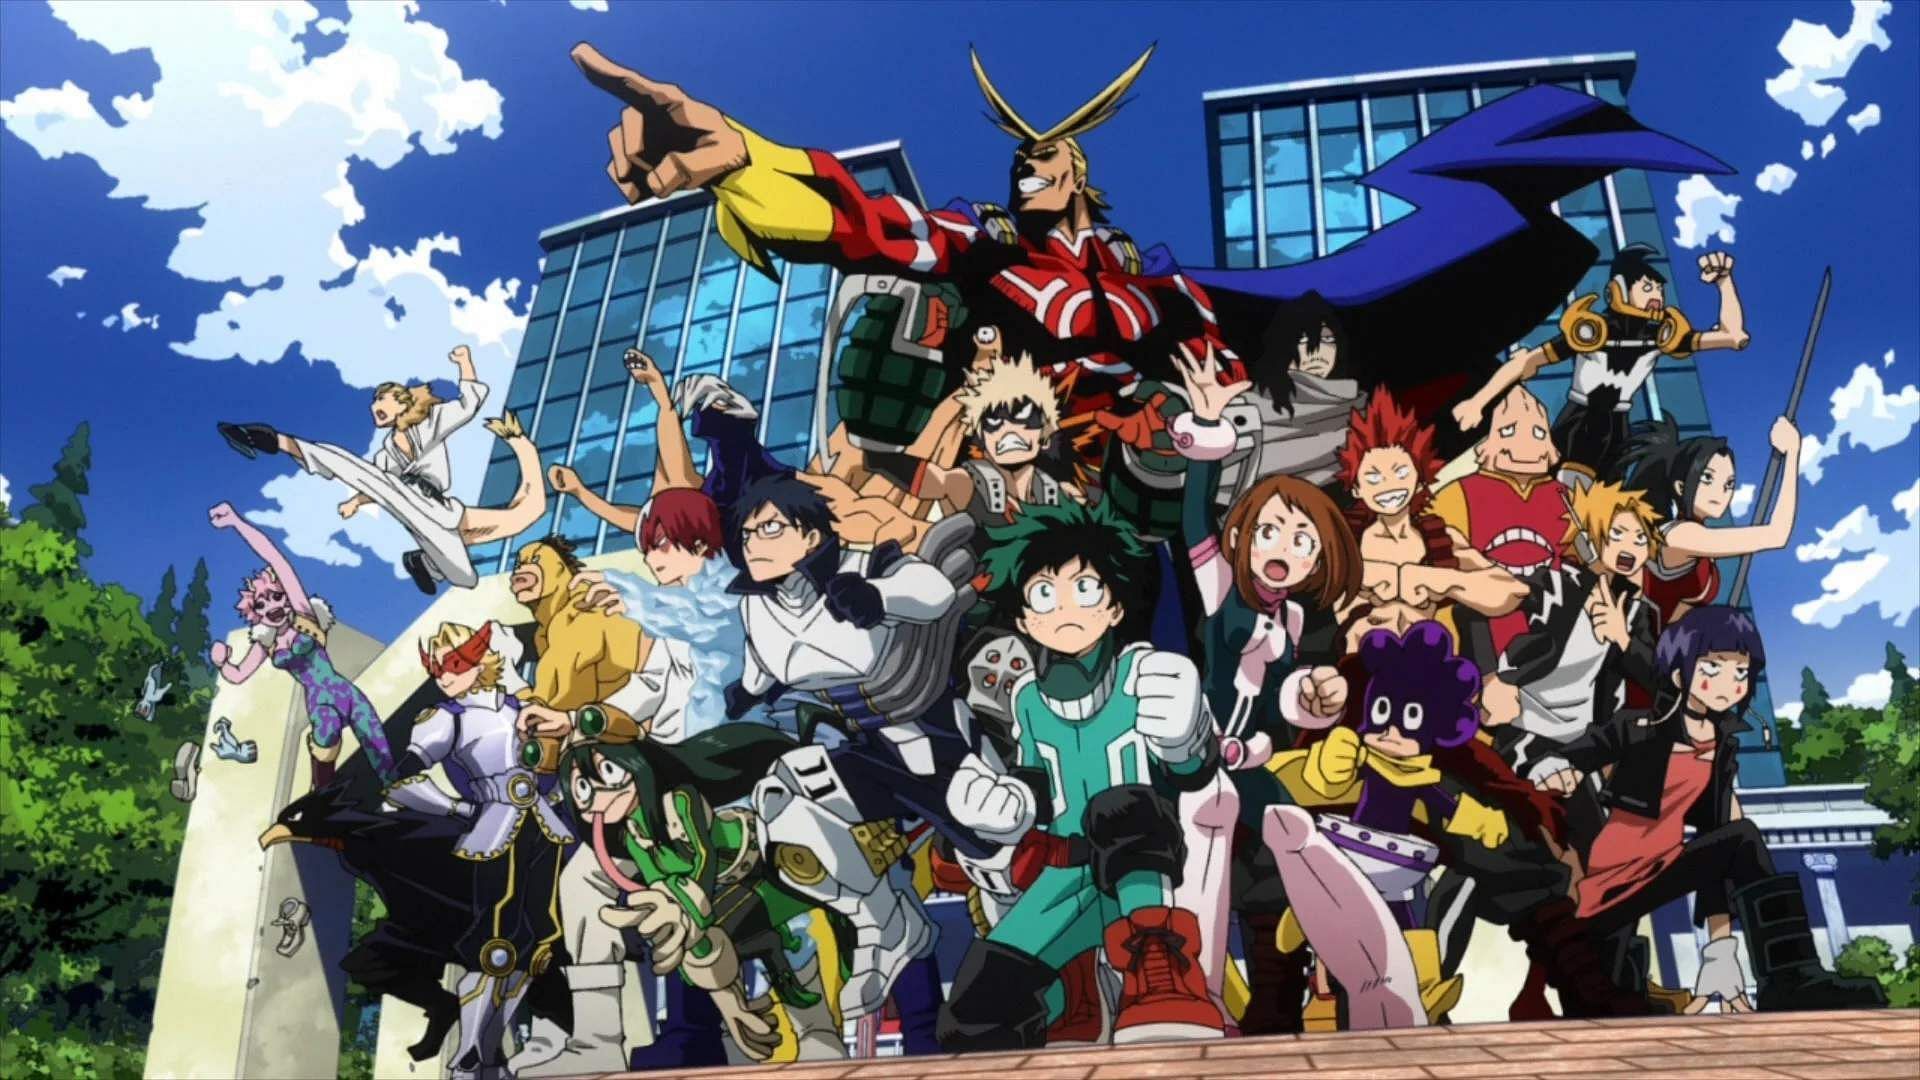 Class 1-A becomes Class 2-A by My Hero Academia chapter 425&#039;s end (Image via BONES)